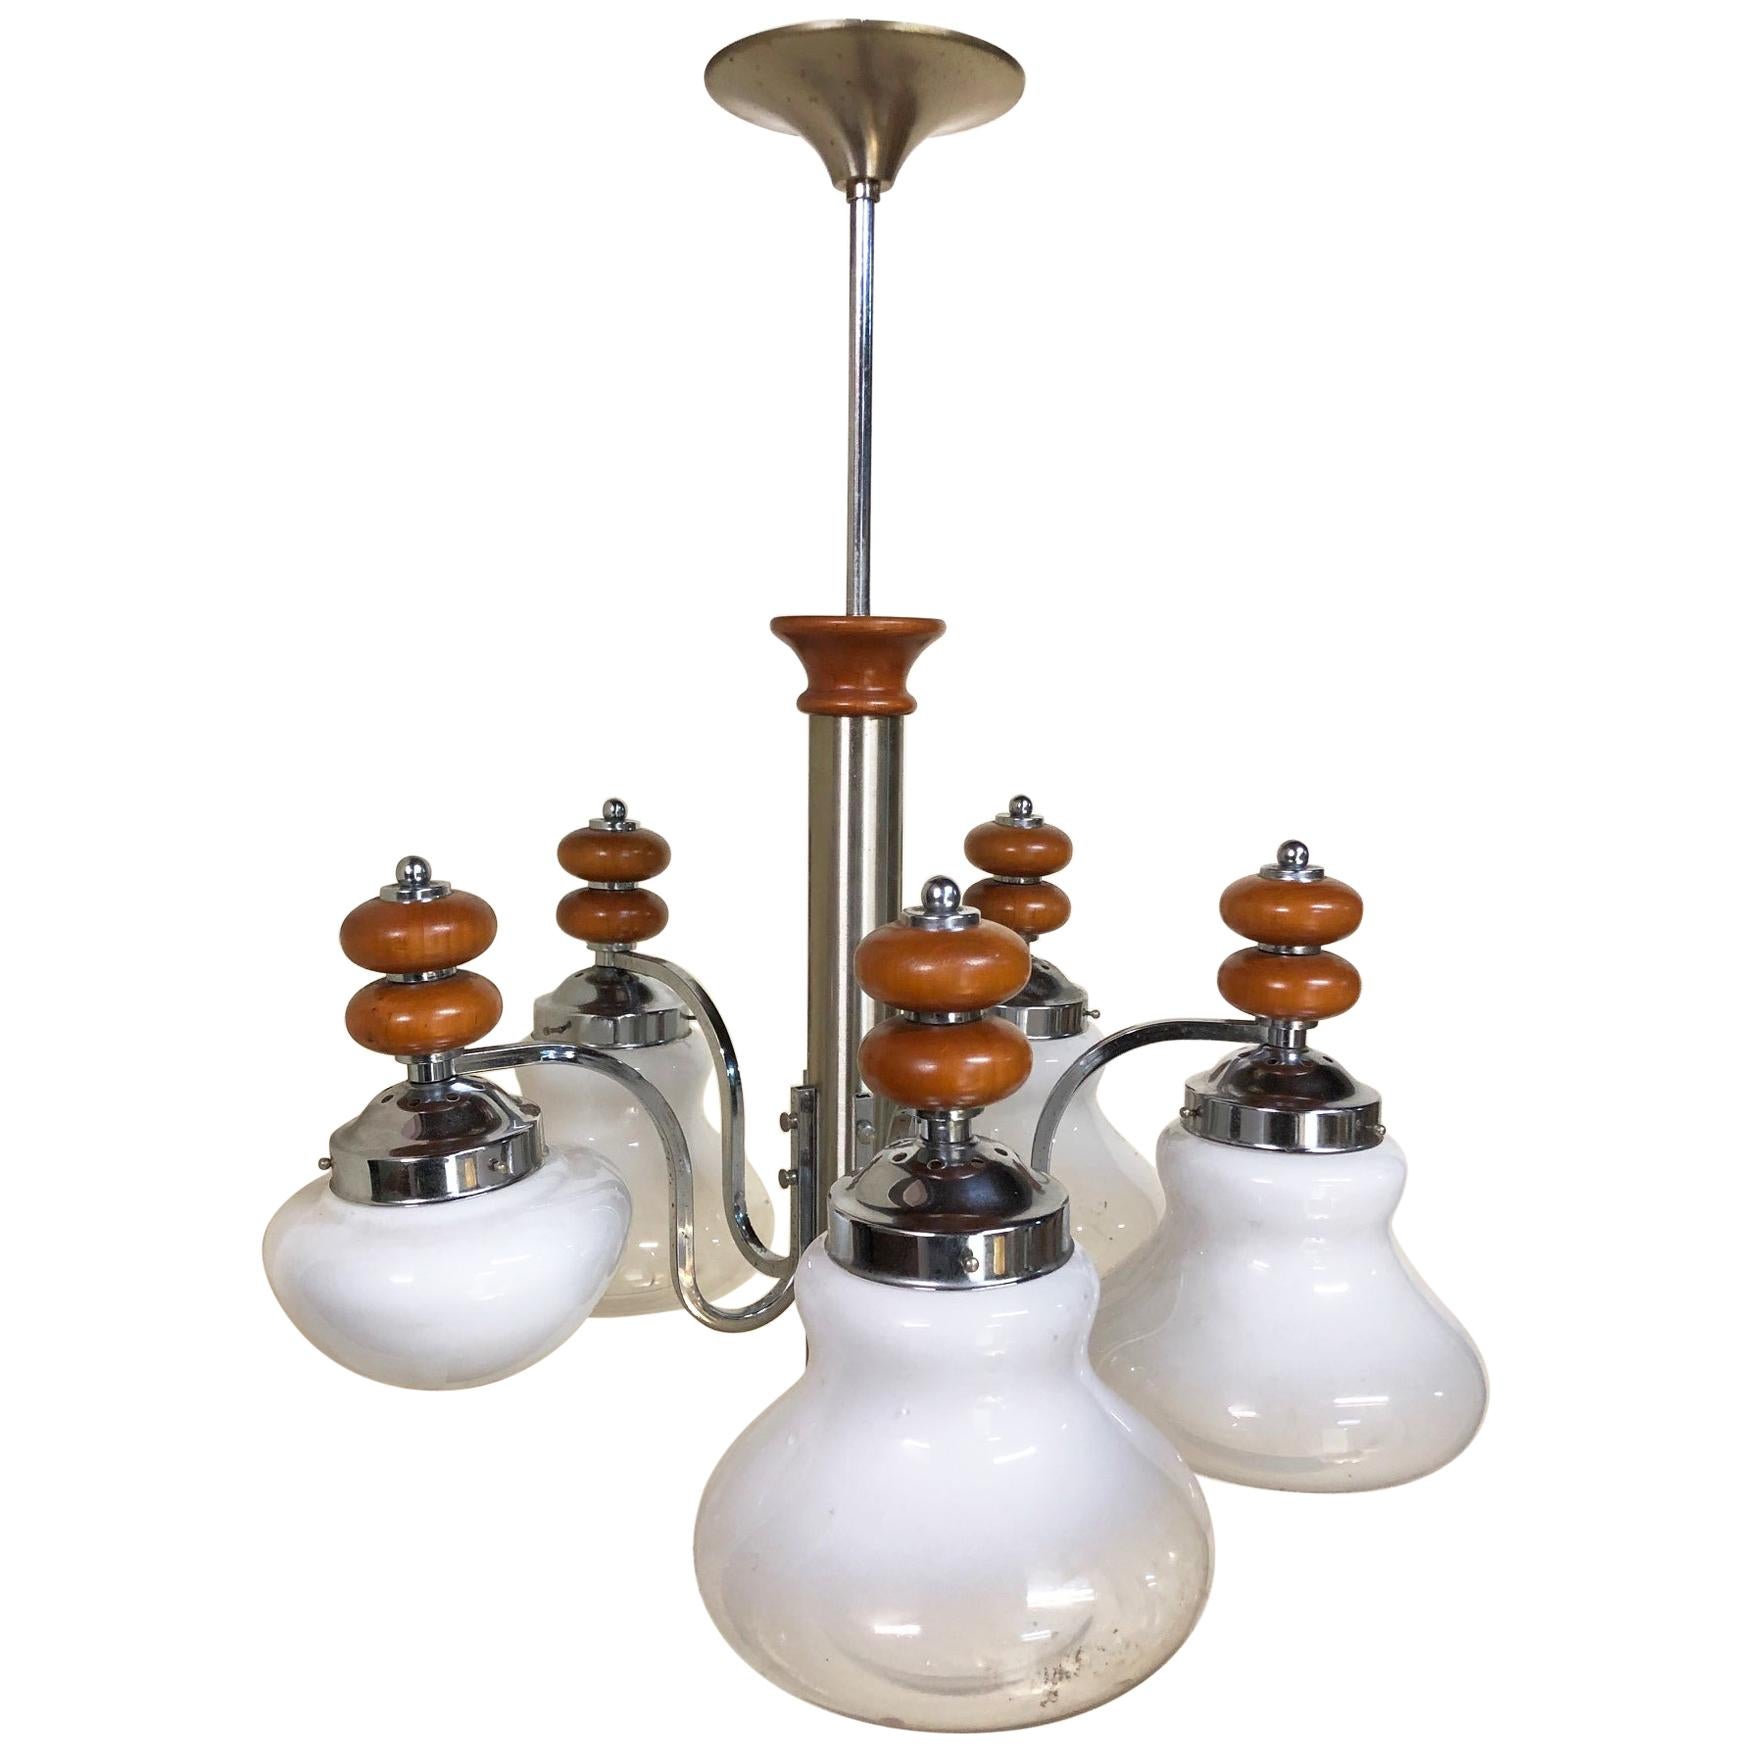 Original Italian Five-Light Chandelier from 1970 Chrome, Wood and Glass